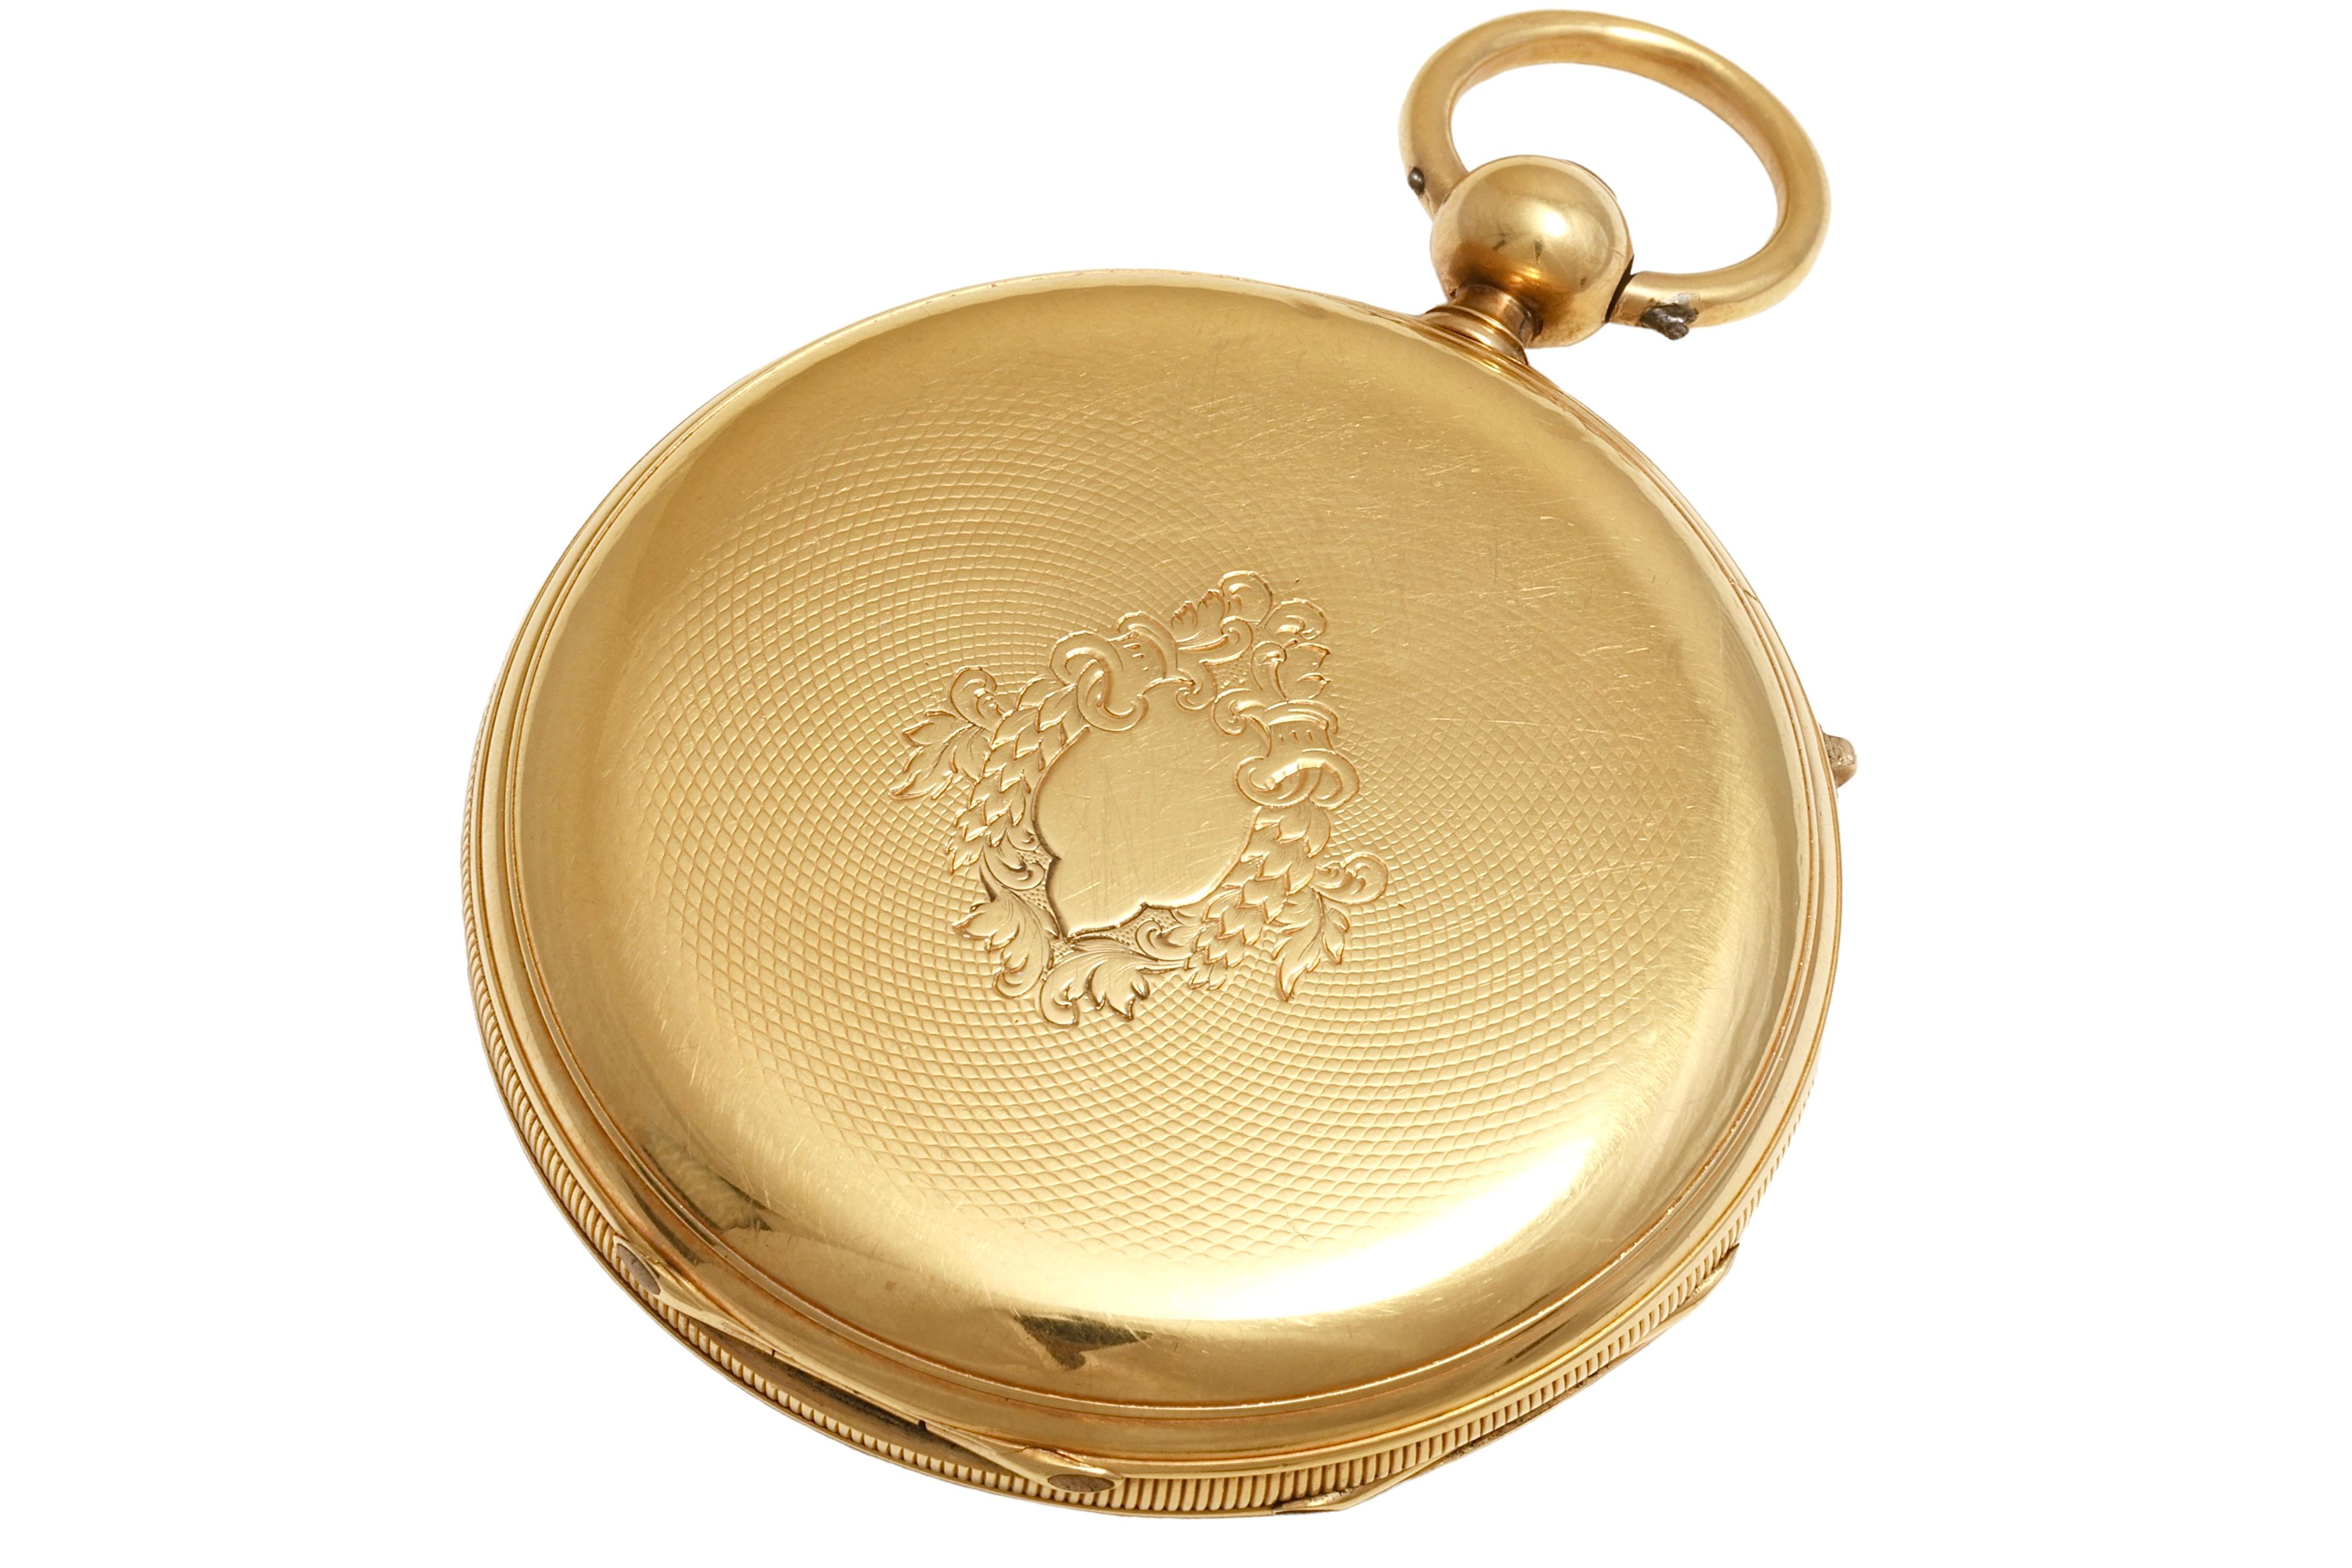 18 kt. Gold Dual Time, Dead Beat Second, Double Barrel A.Perret Pocket Watch In Excellent Condition For Sale In Antwerp, BE